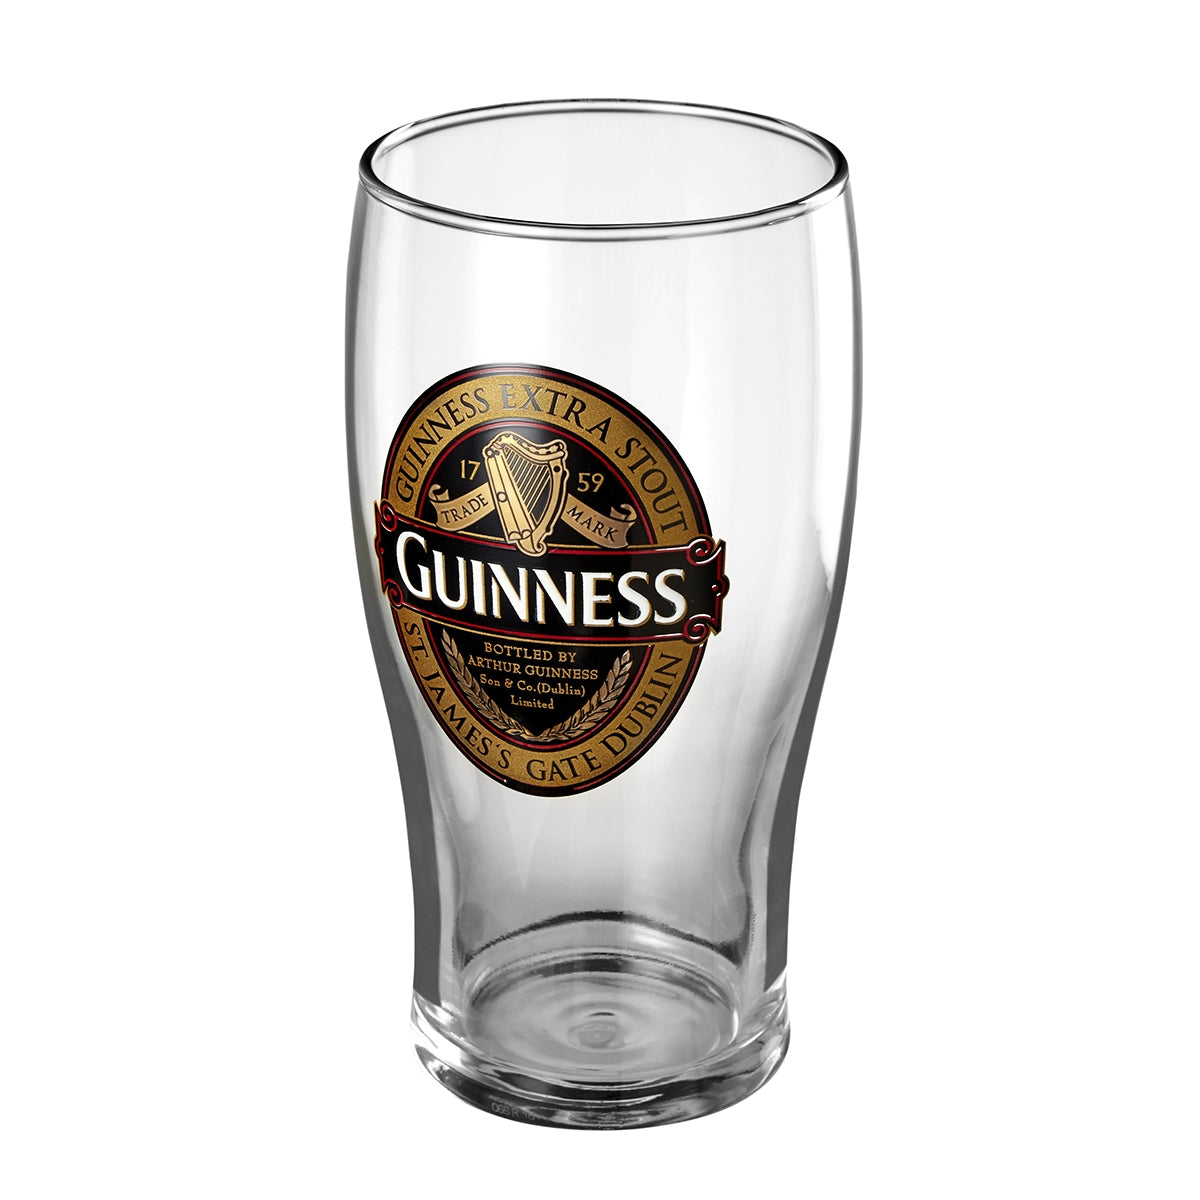 Authentic Guinness Classic Pint Glass Twin Pack, perfect for enjoying a cold one in style. Made of high-quality glass, this official merchandise is a must-have for any Guinness enthusiast. Cheers to good times with this iconic product.